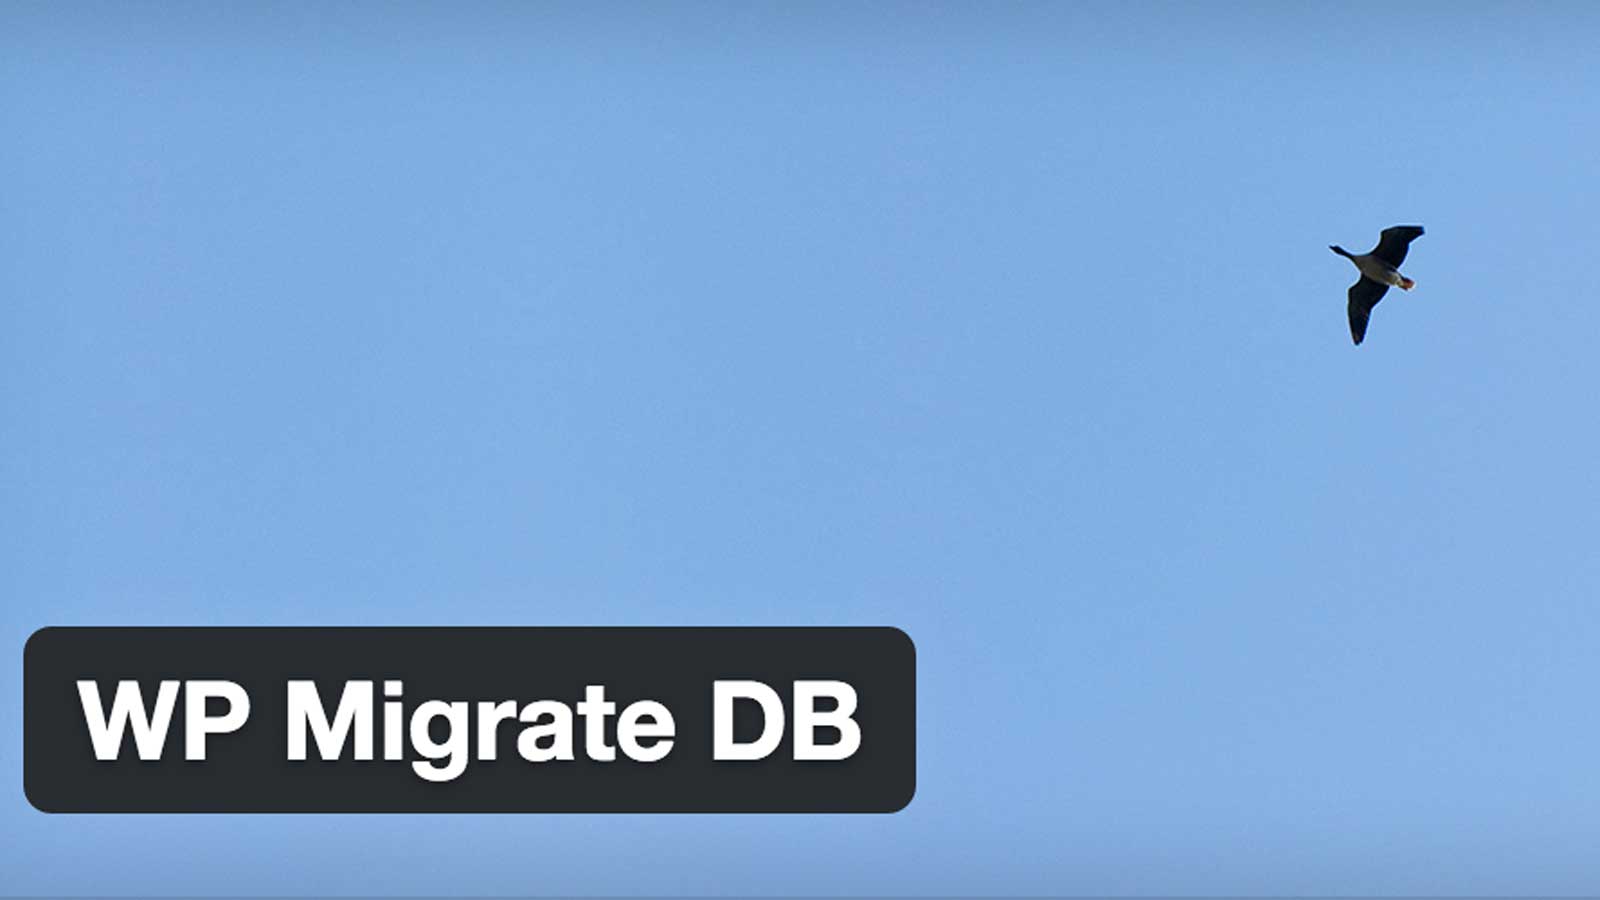 Disable plugins using WP Migrate DB